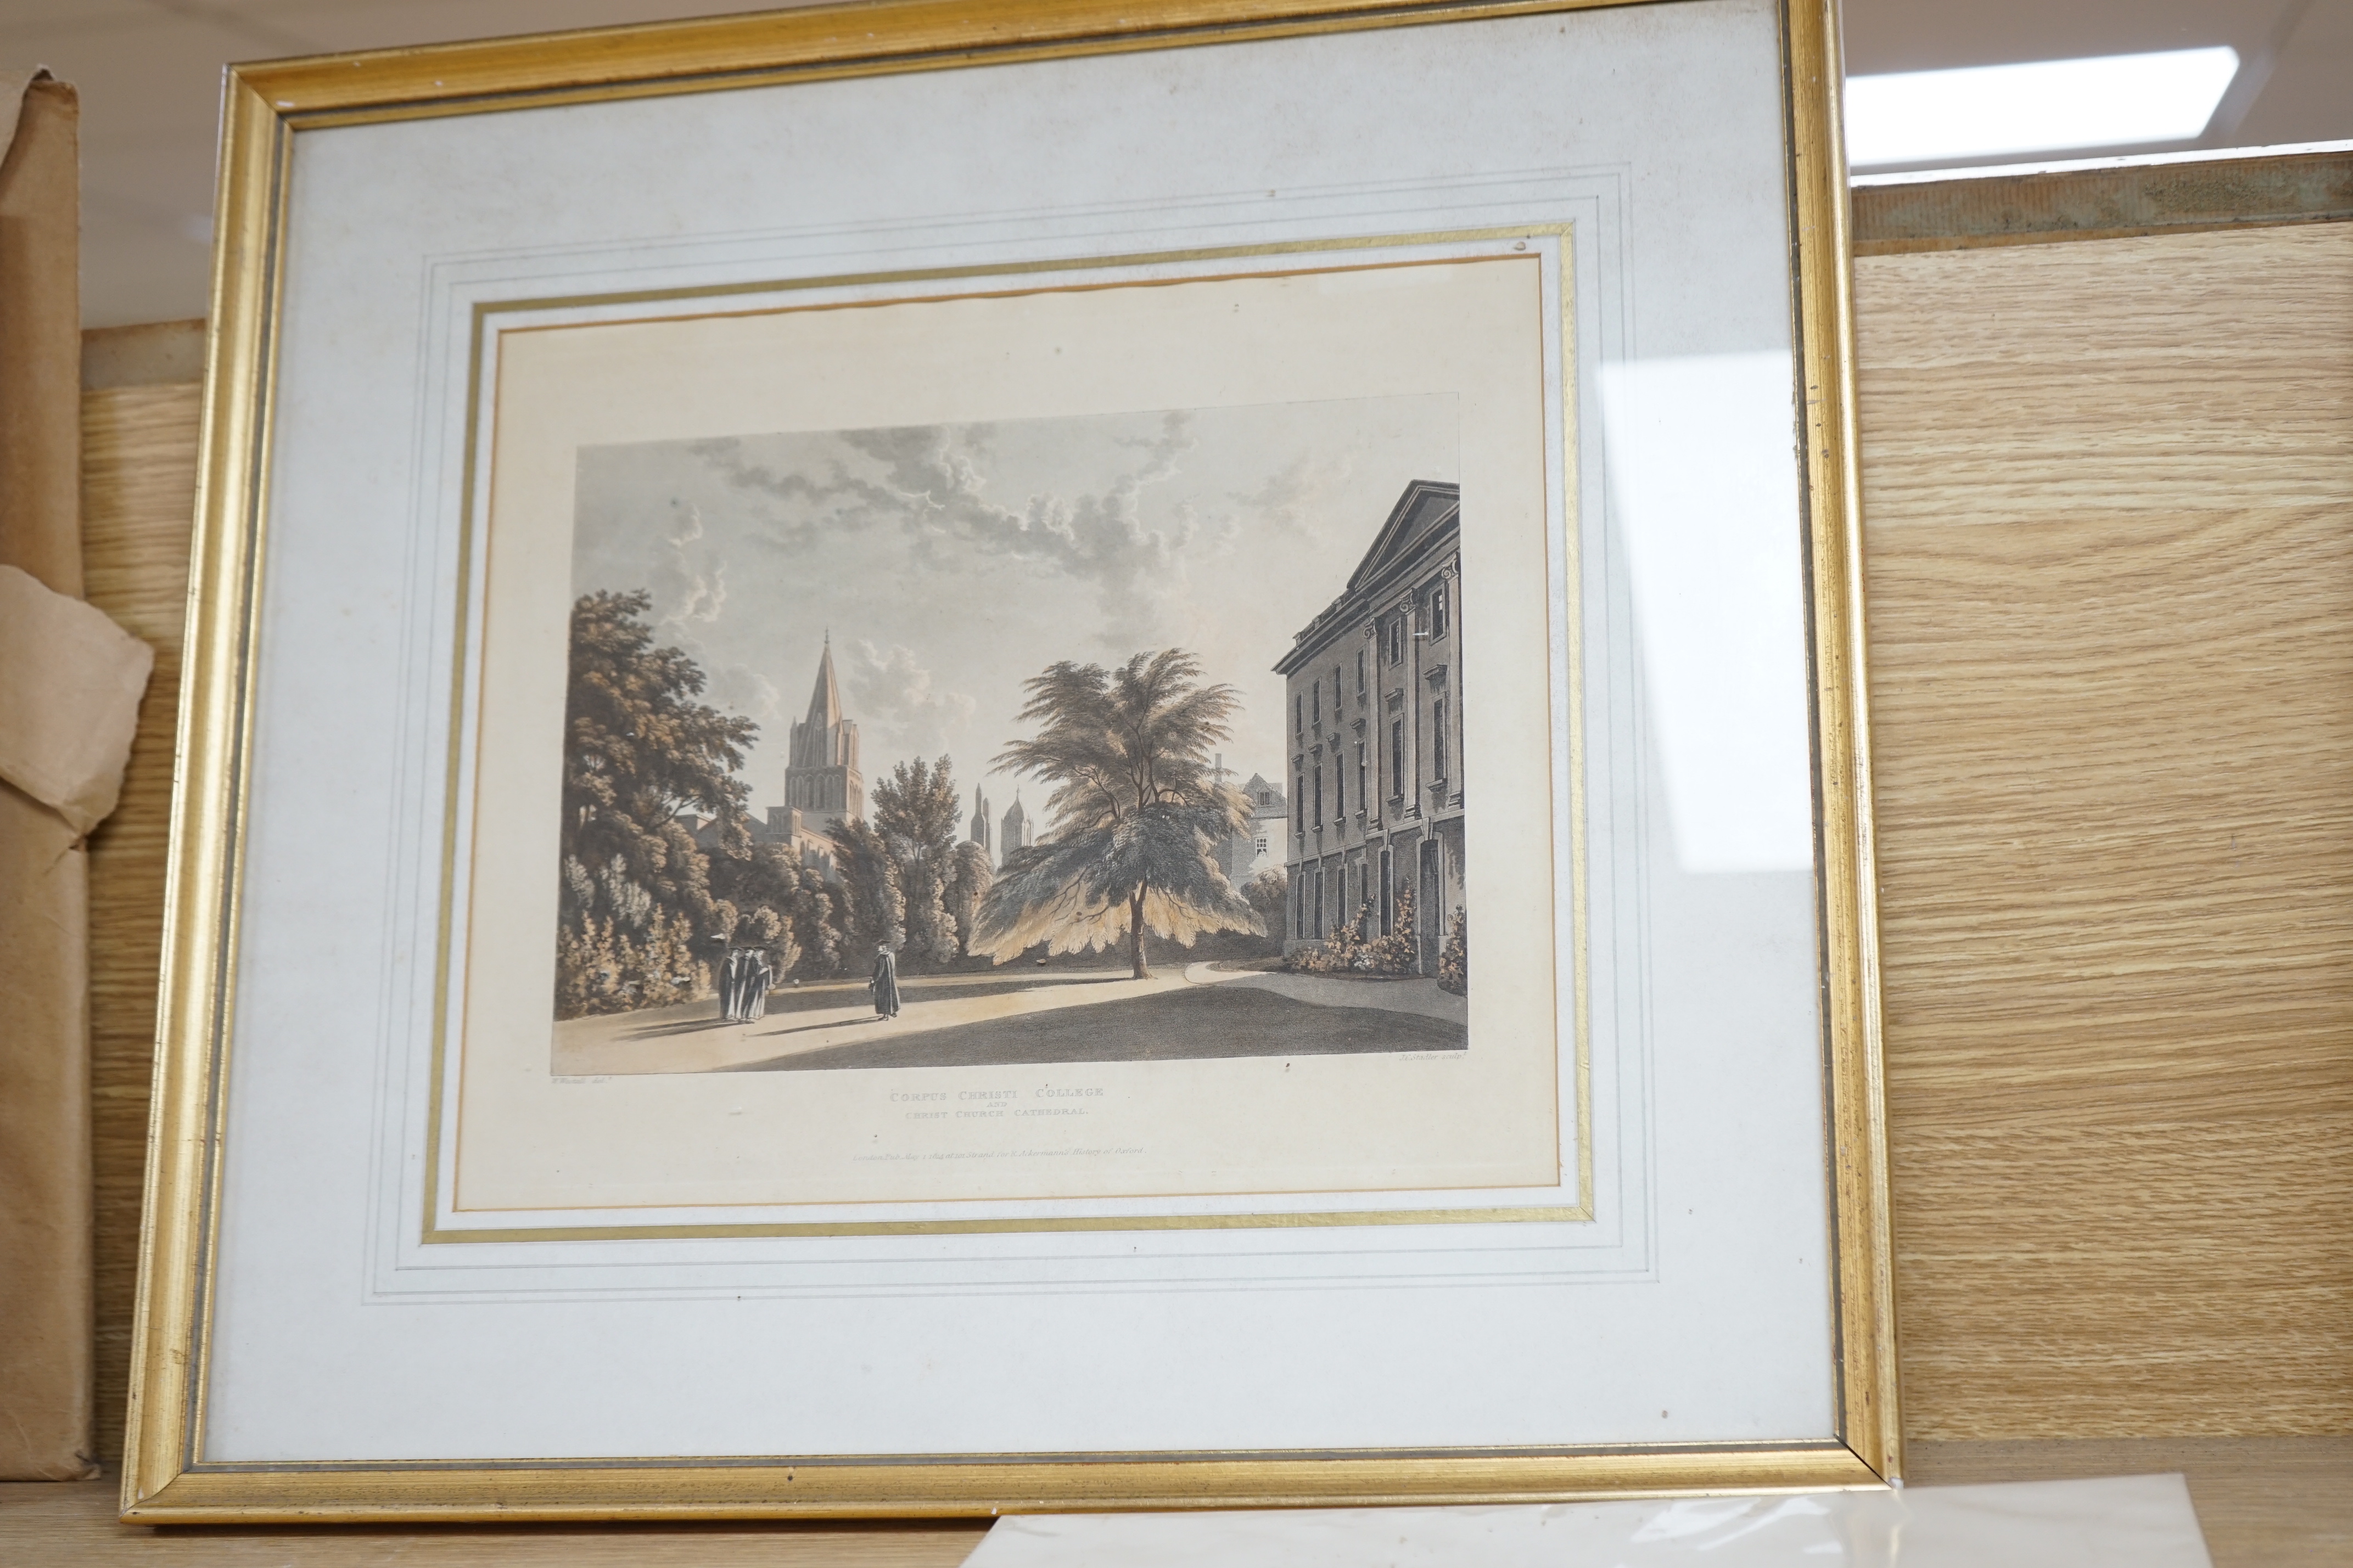 Two 19th century colour engravings, Corpus Christi College and Christchurch Cathedral, one published May 1st, 1841 for R. Ackermann's History of Oxford, London, one mounted, unframed, largest 26 x 31cm, together with Eto